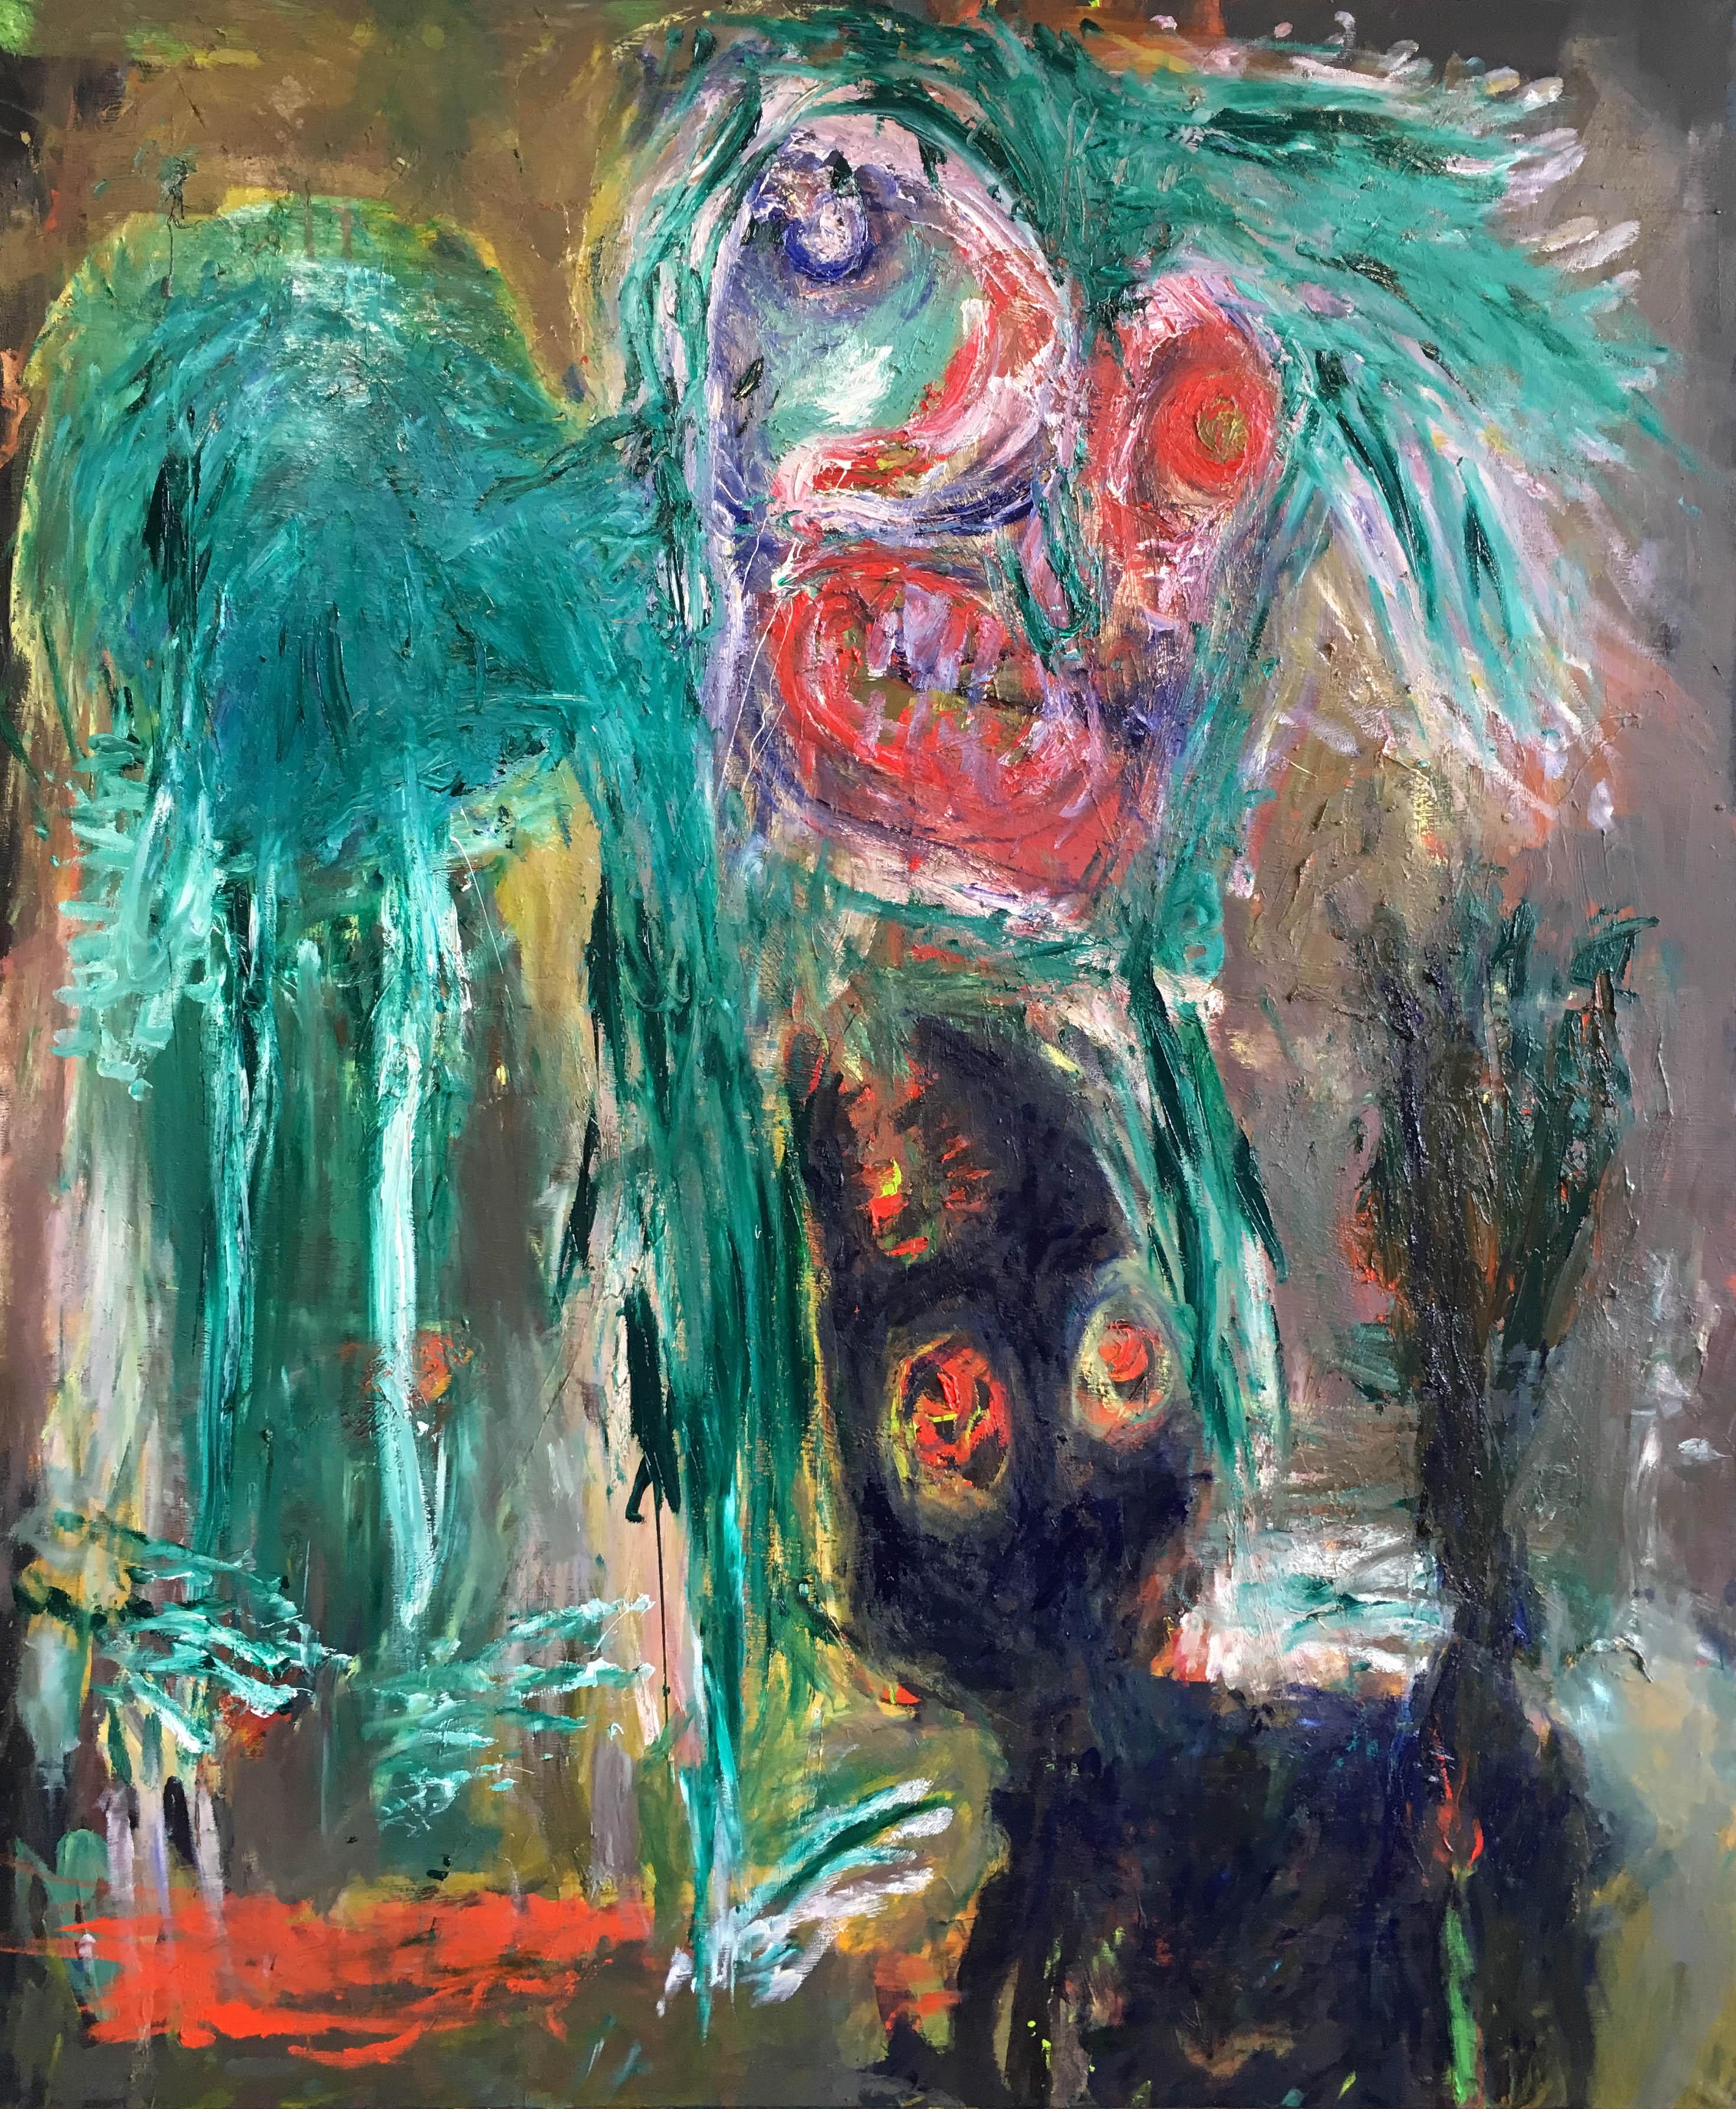 Supper is not over ! - Julien Wolf, Contemporary Expressionist Painting